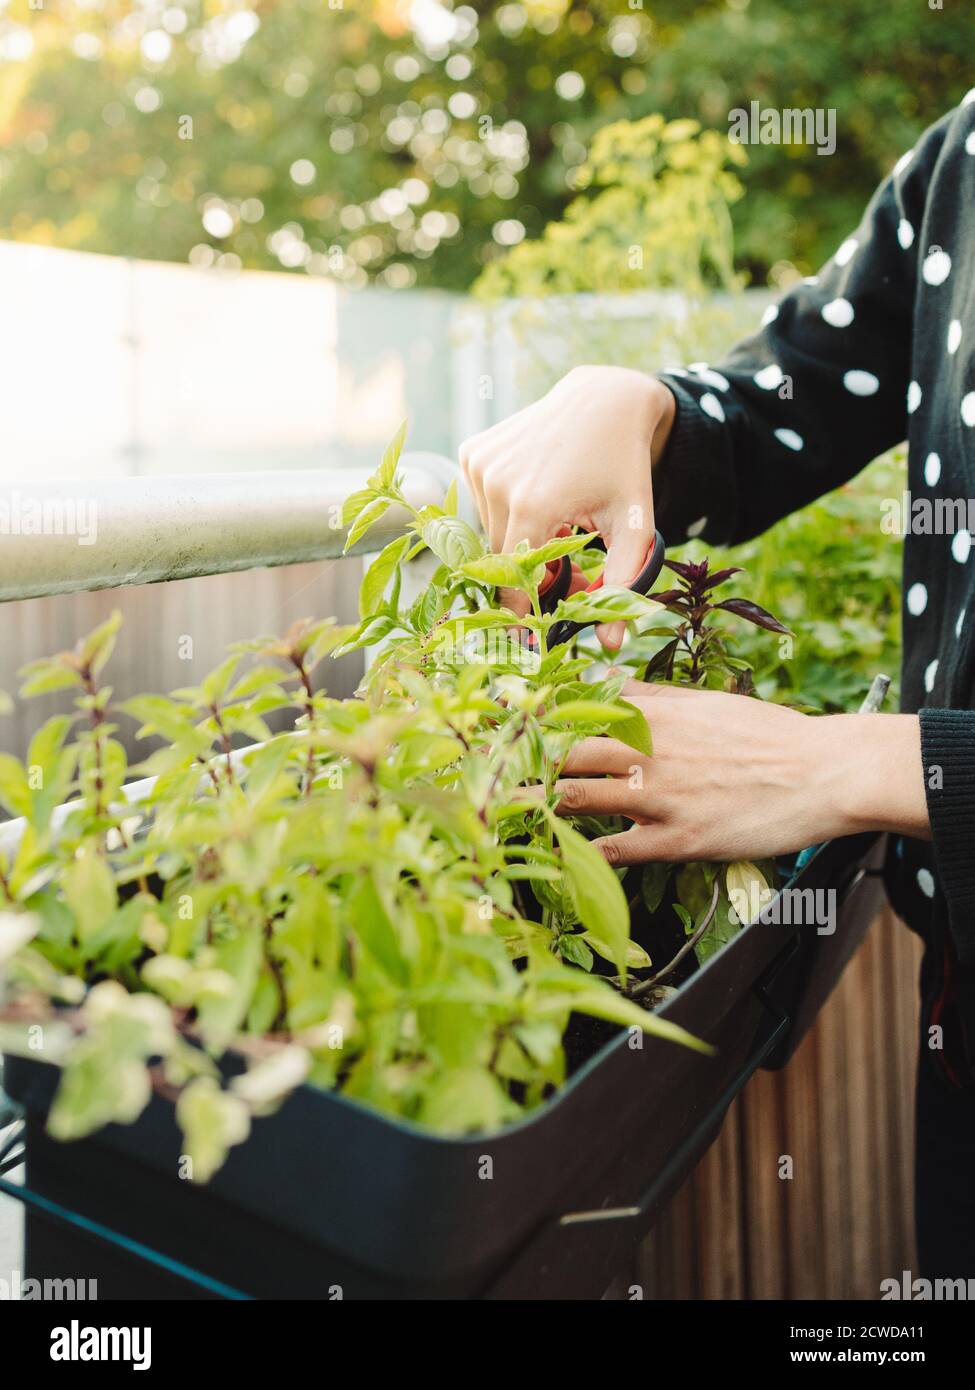 Unrecognisable person cutting leaves from a basil plant in a balcony planter Stock Photo